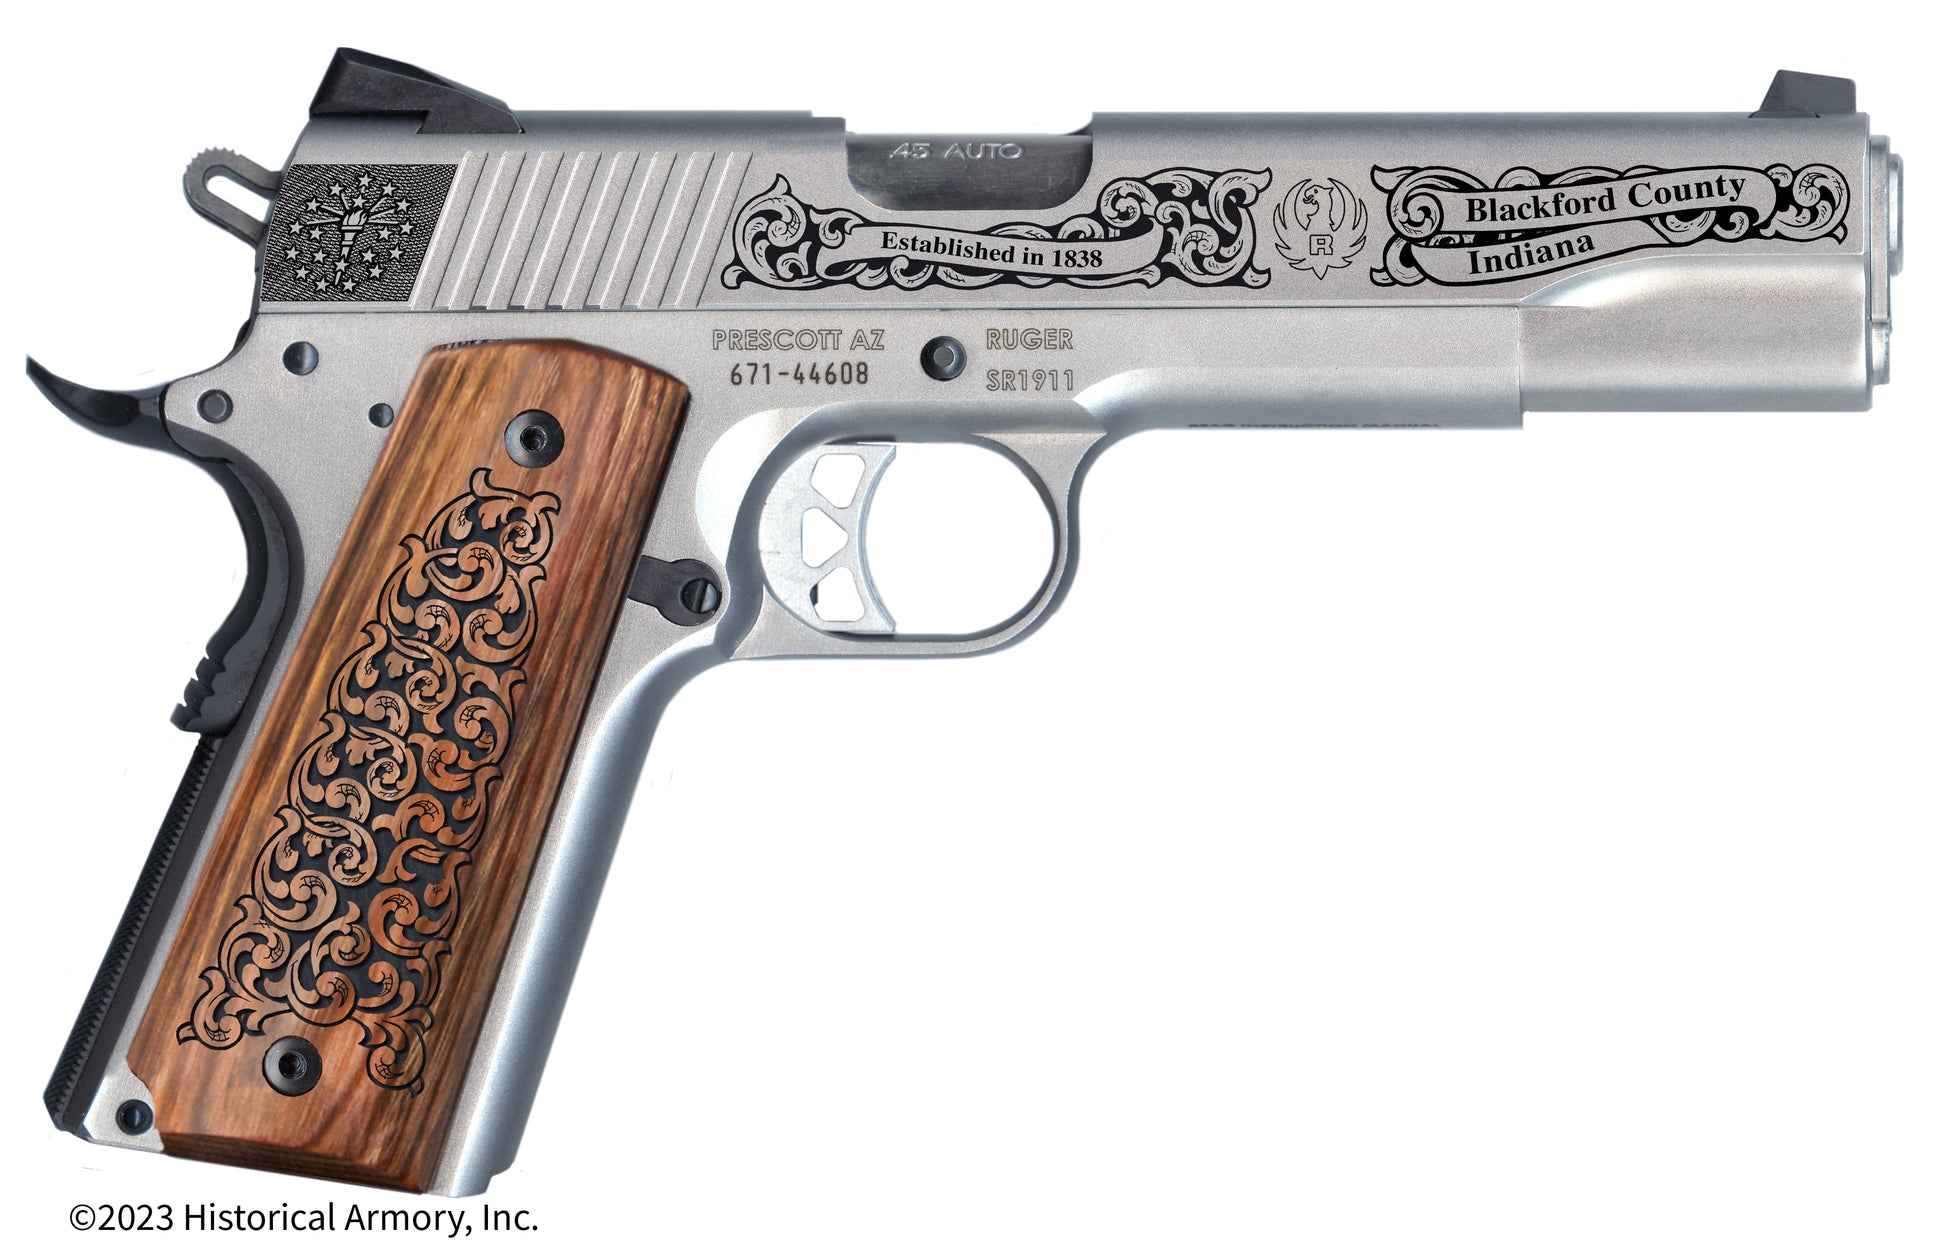 Blackford County Indiana Engraved .45 Auto Ruger 1911